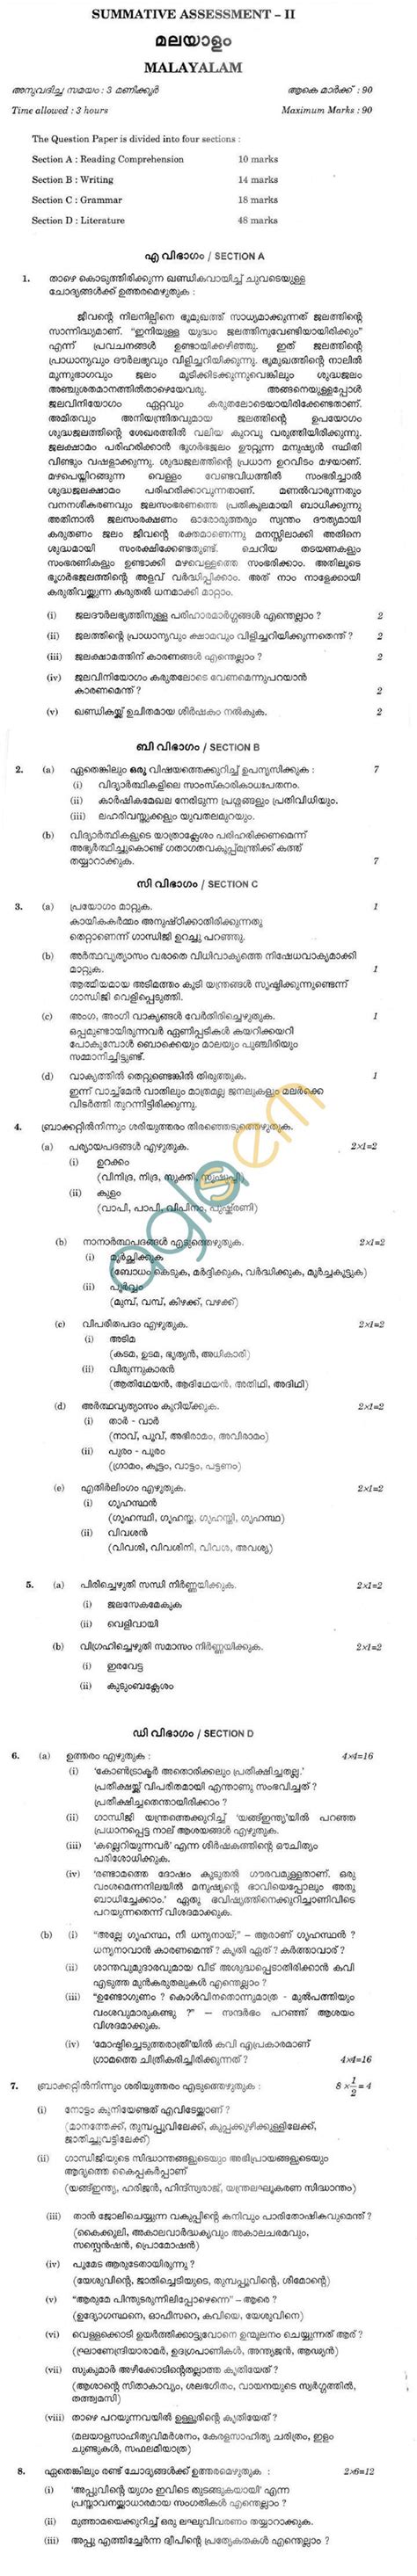 You are informing the receiver about your new product which you have recently. CBSE Sample Papers 2020 for Class 10 - Malayalam | Sample ...